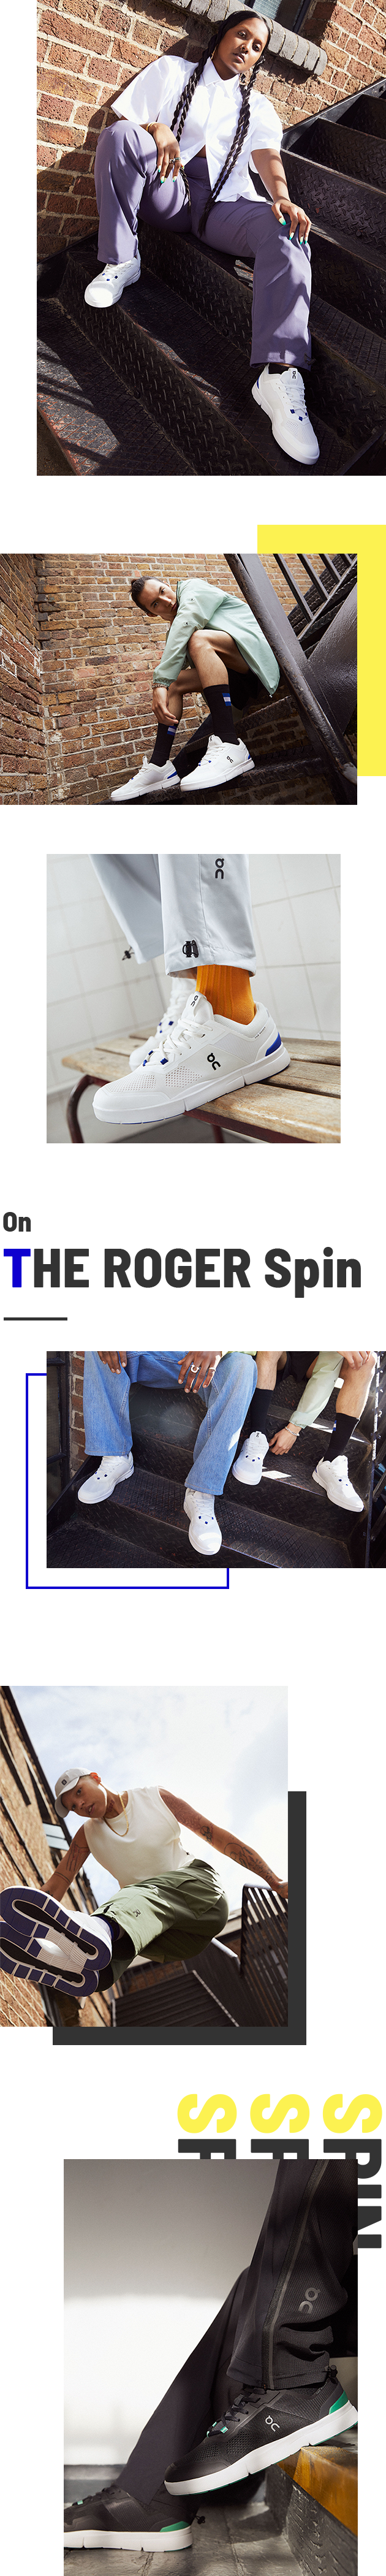 On THE ROGER SPIN